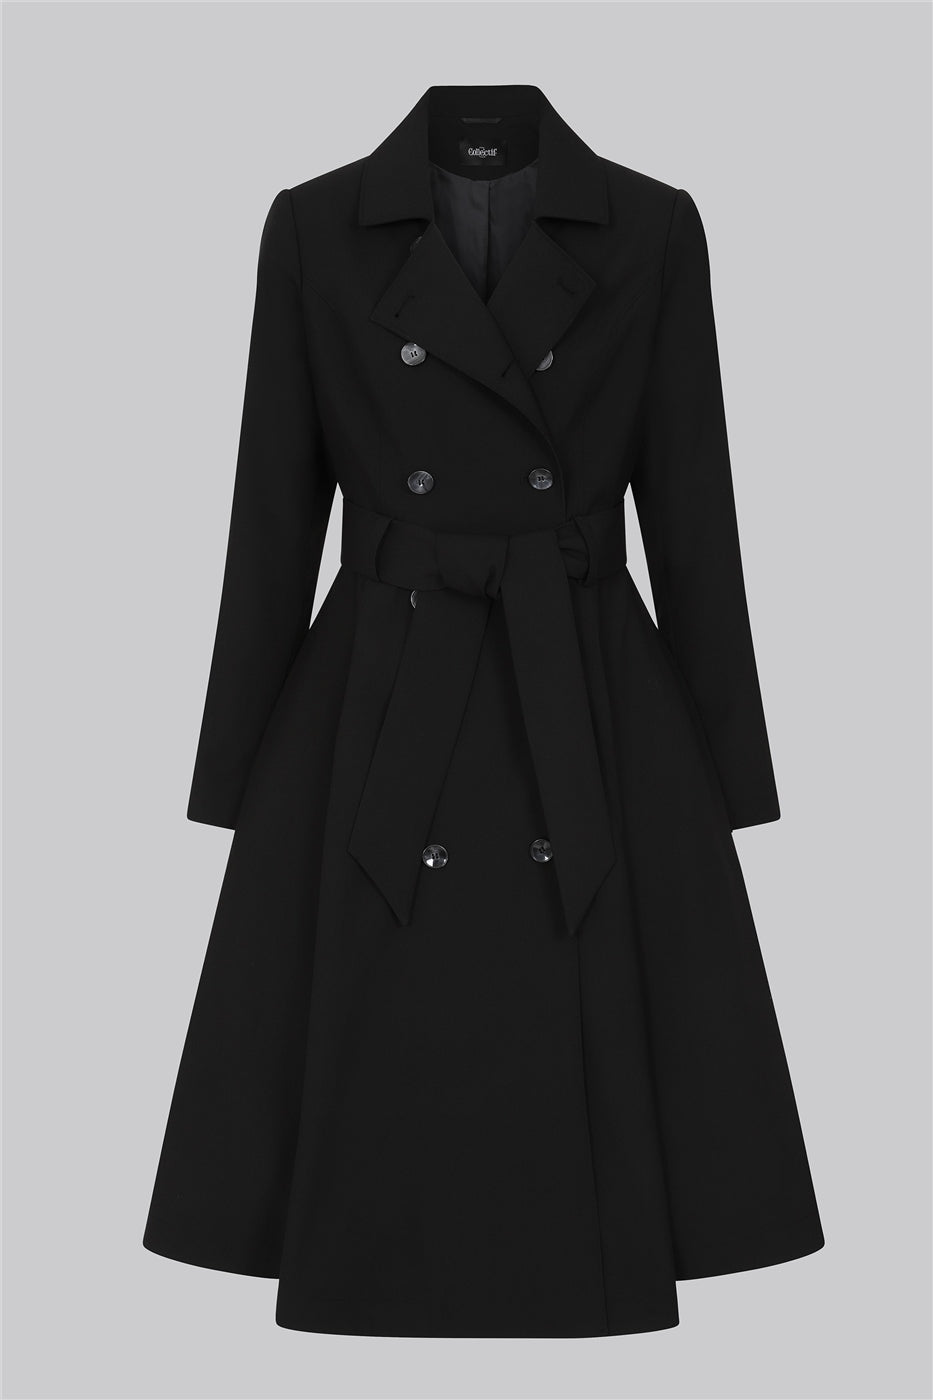 Collectif Korrina Swing Trench Coat - Kate's Clothing